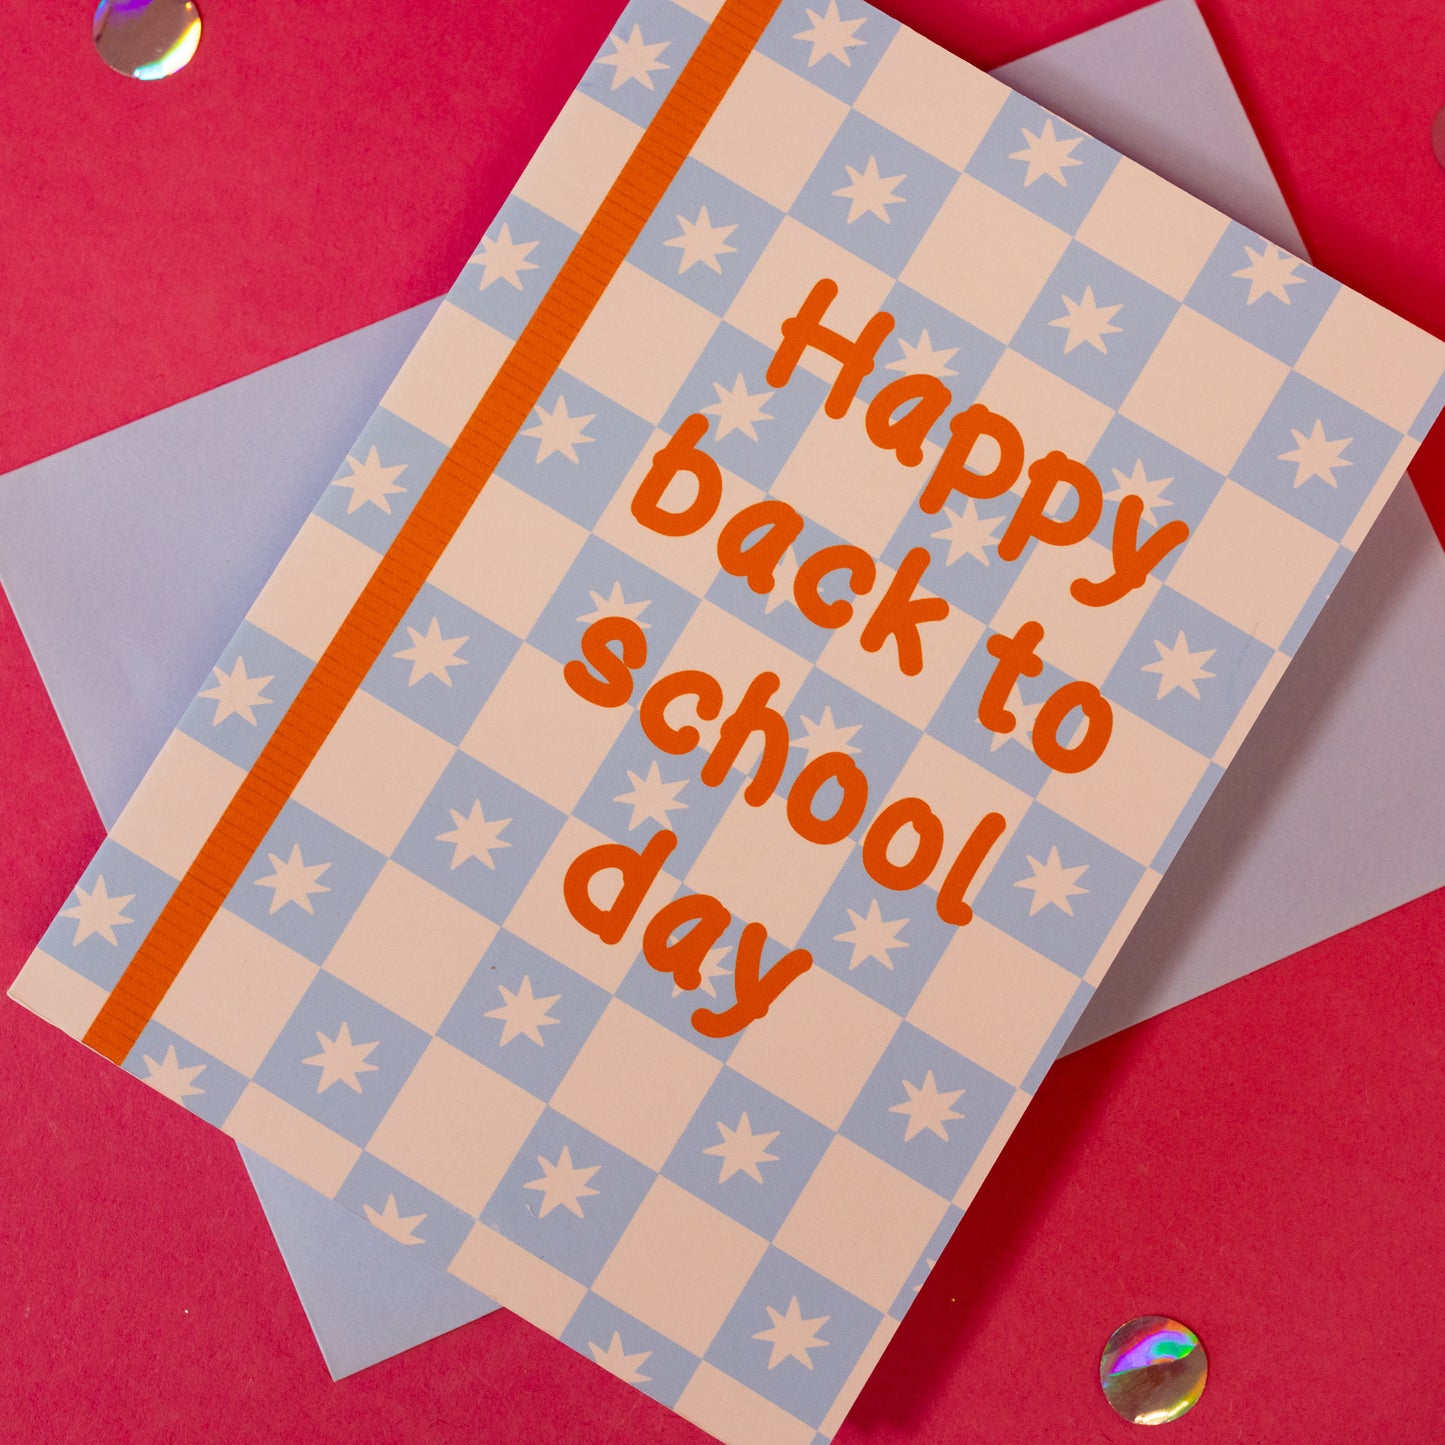 Happy Back To School Day Card